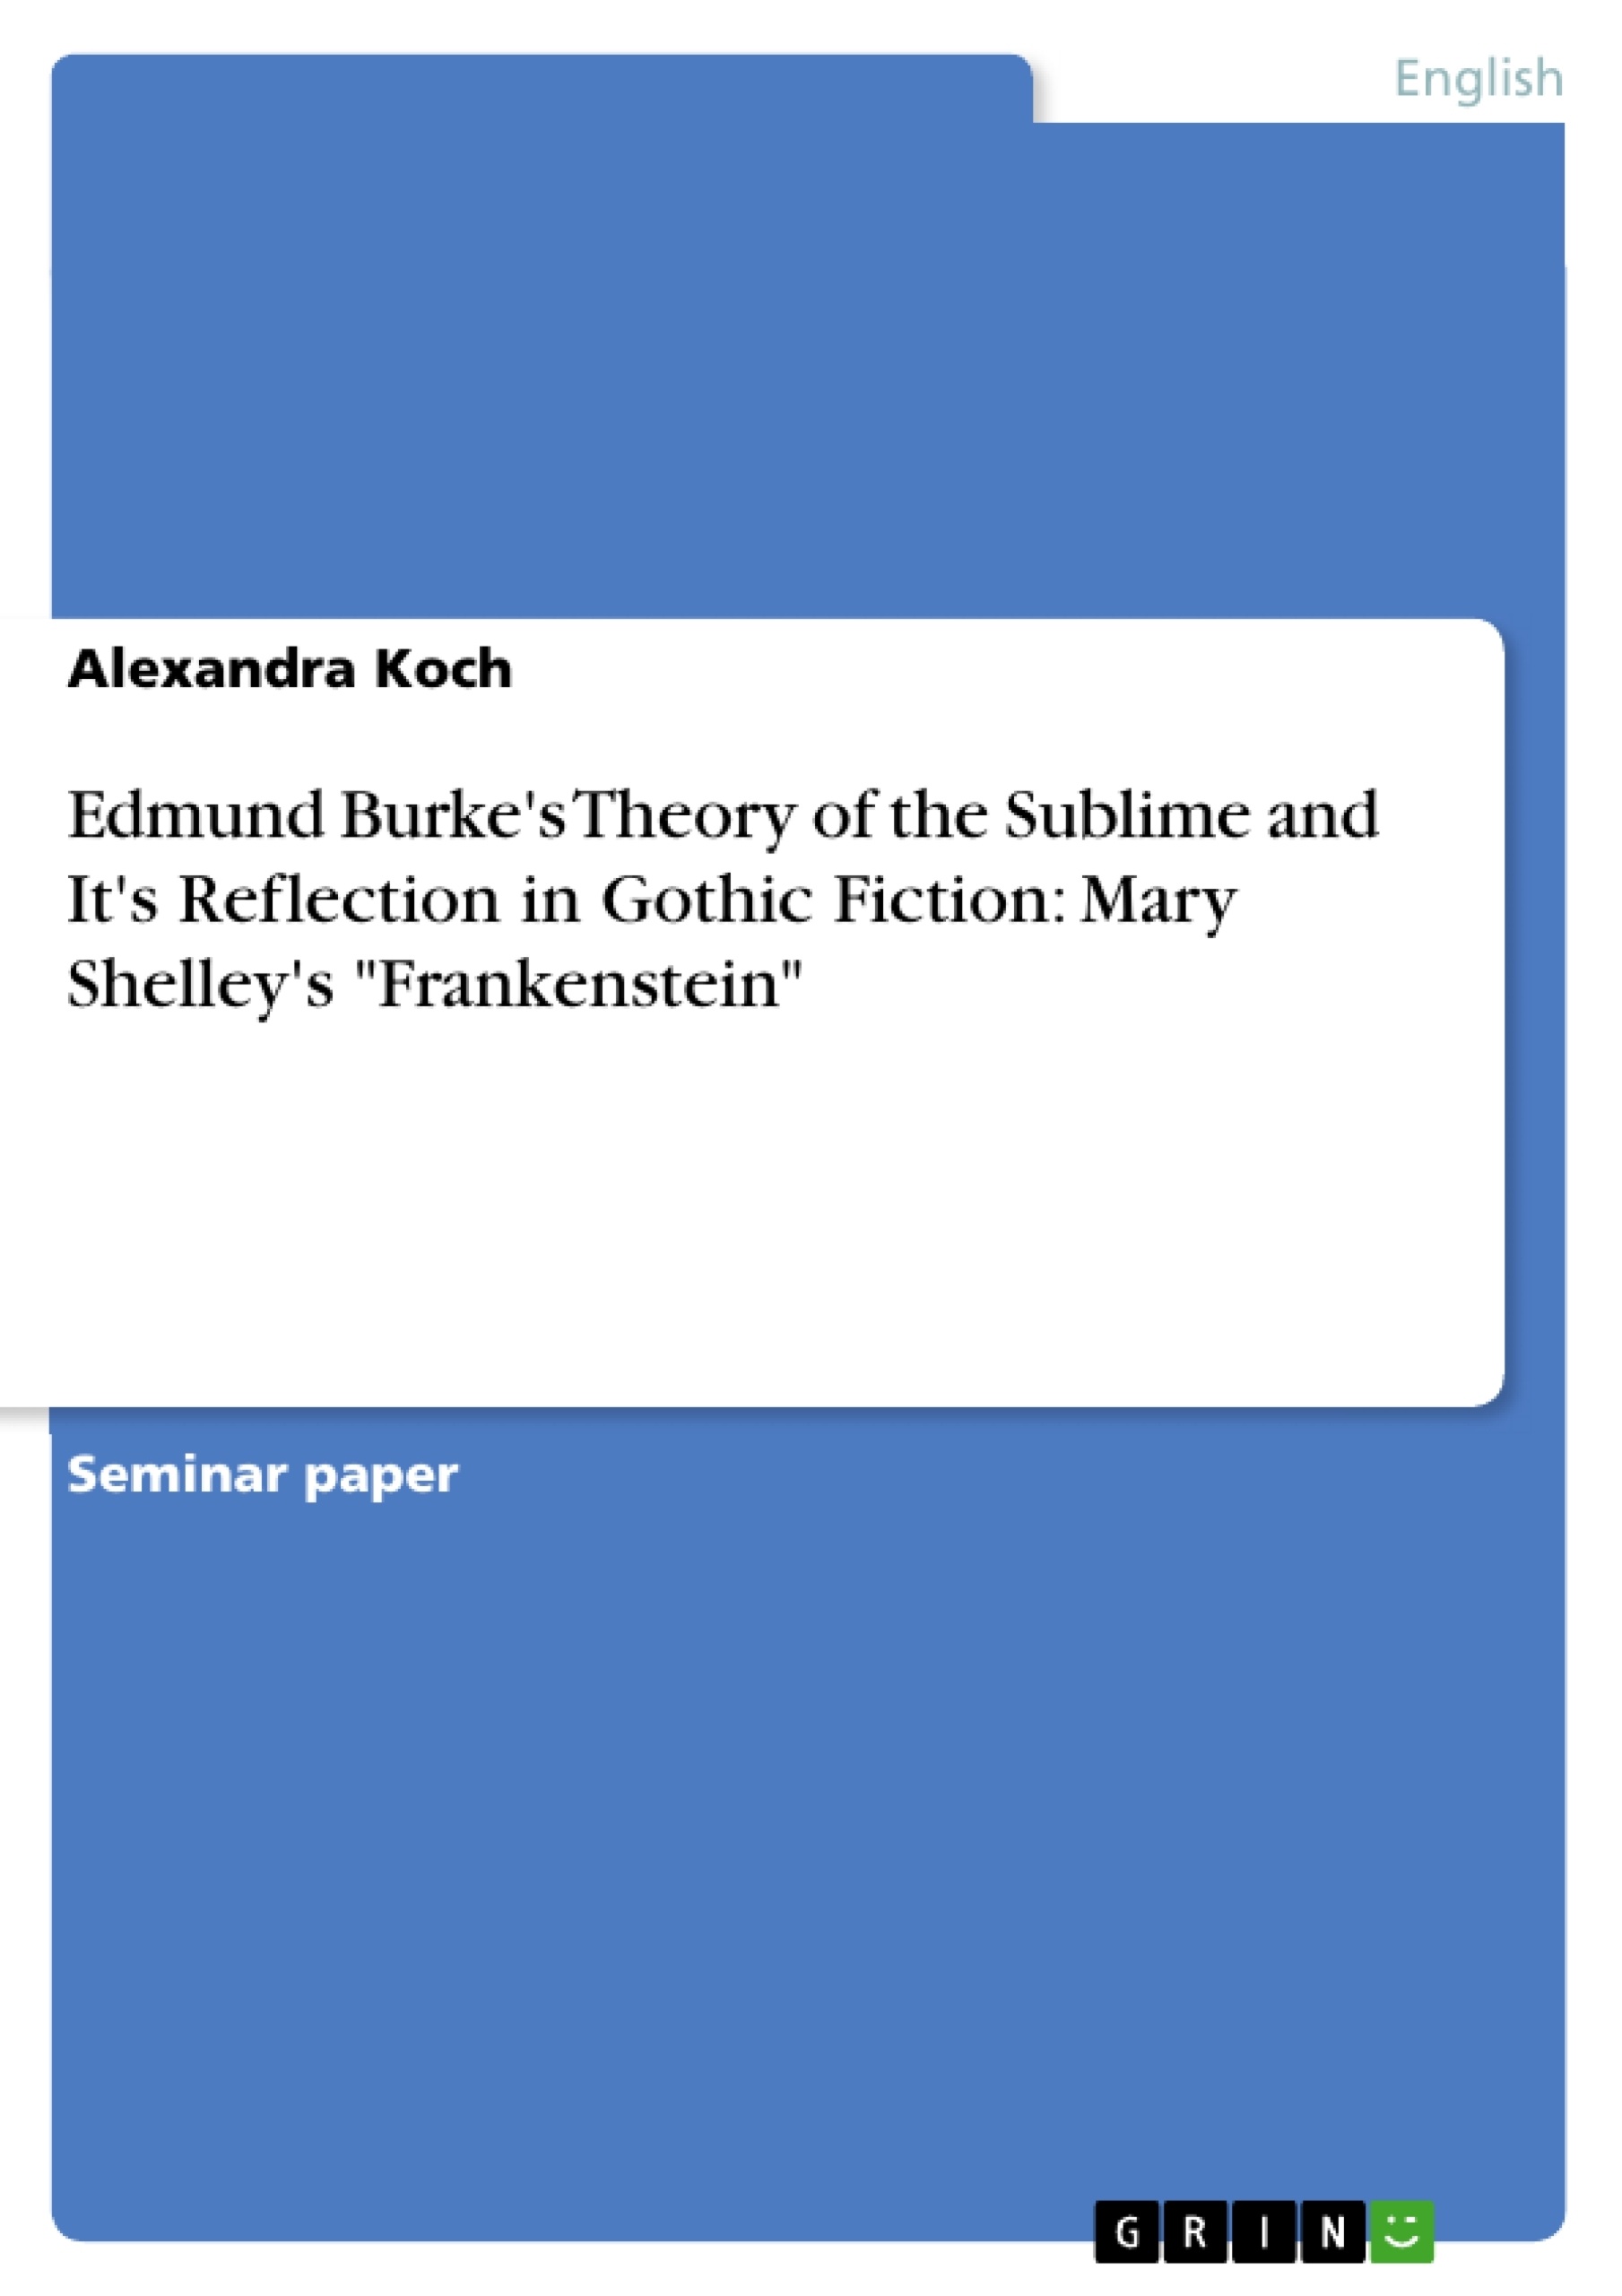 Title: Edmund Burke's Theory of the Sublime and It's Reflection in Gothic Fiction: Mary Shelley's "Frankenstein"